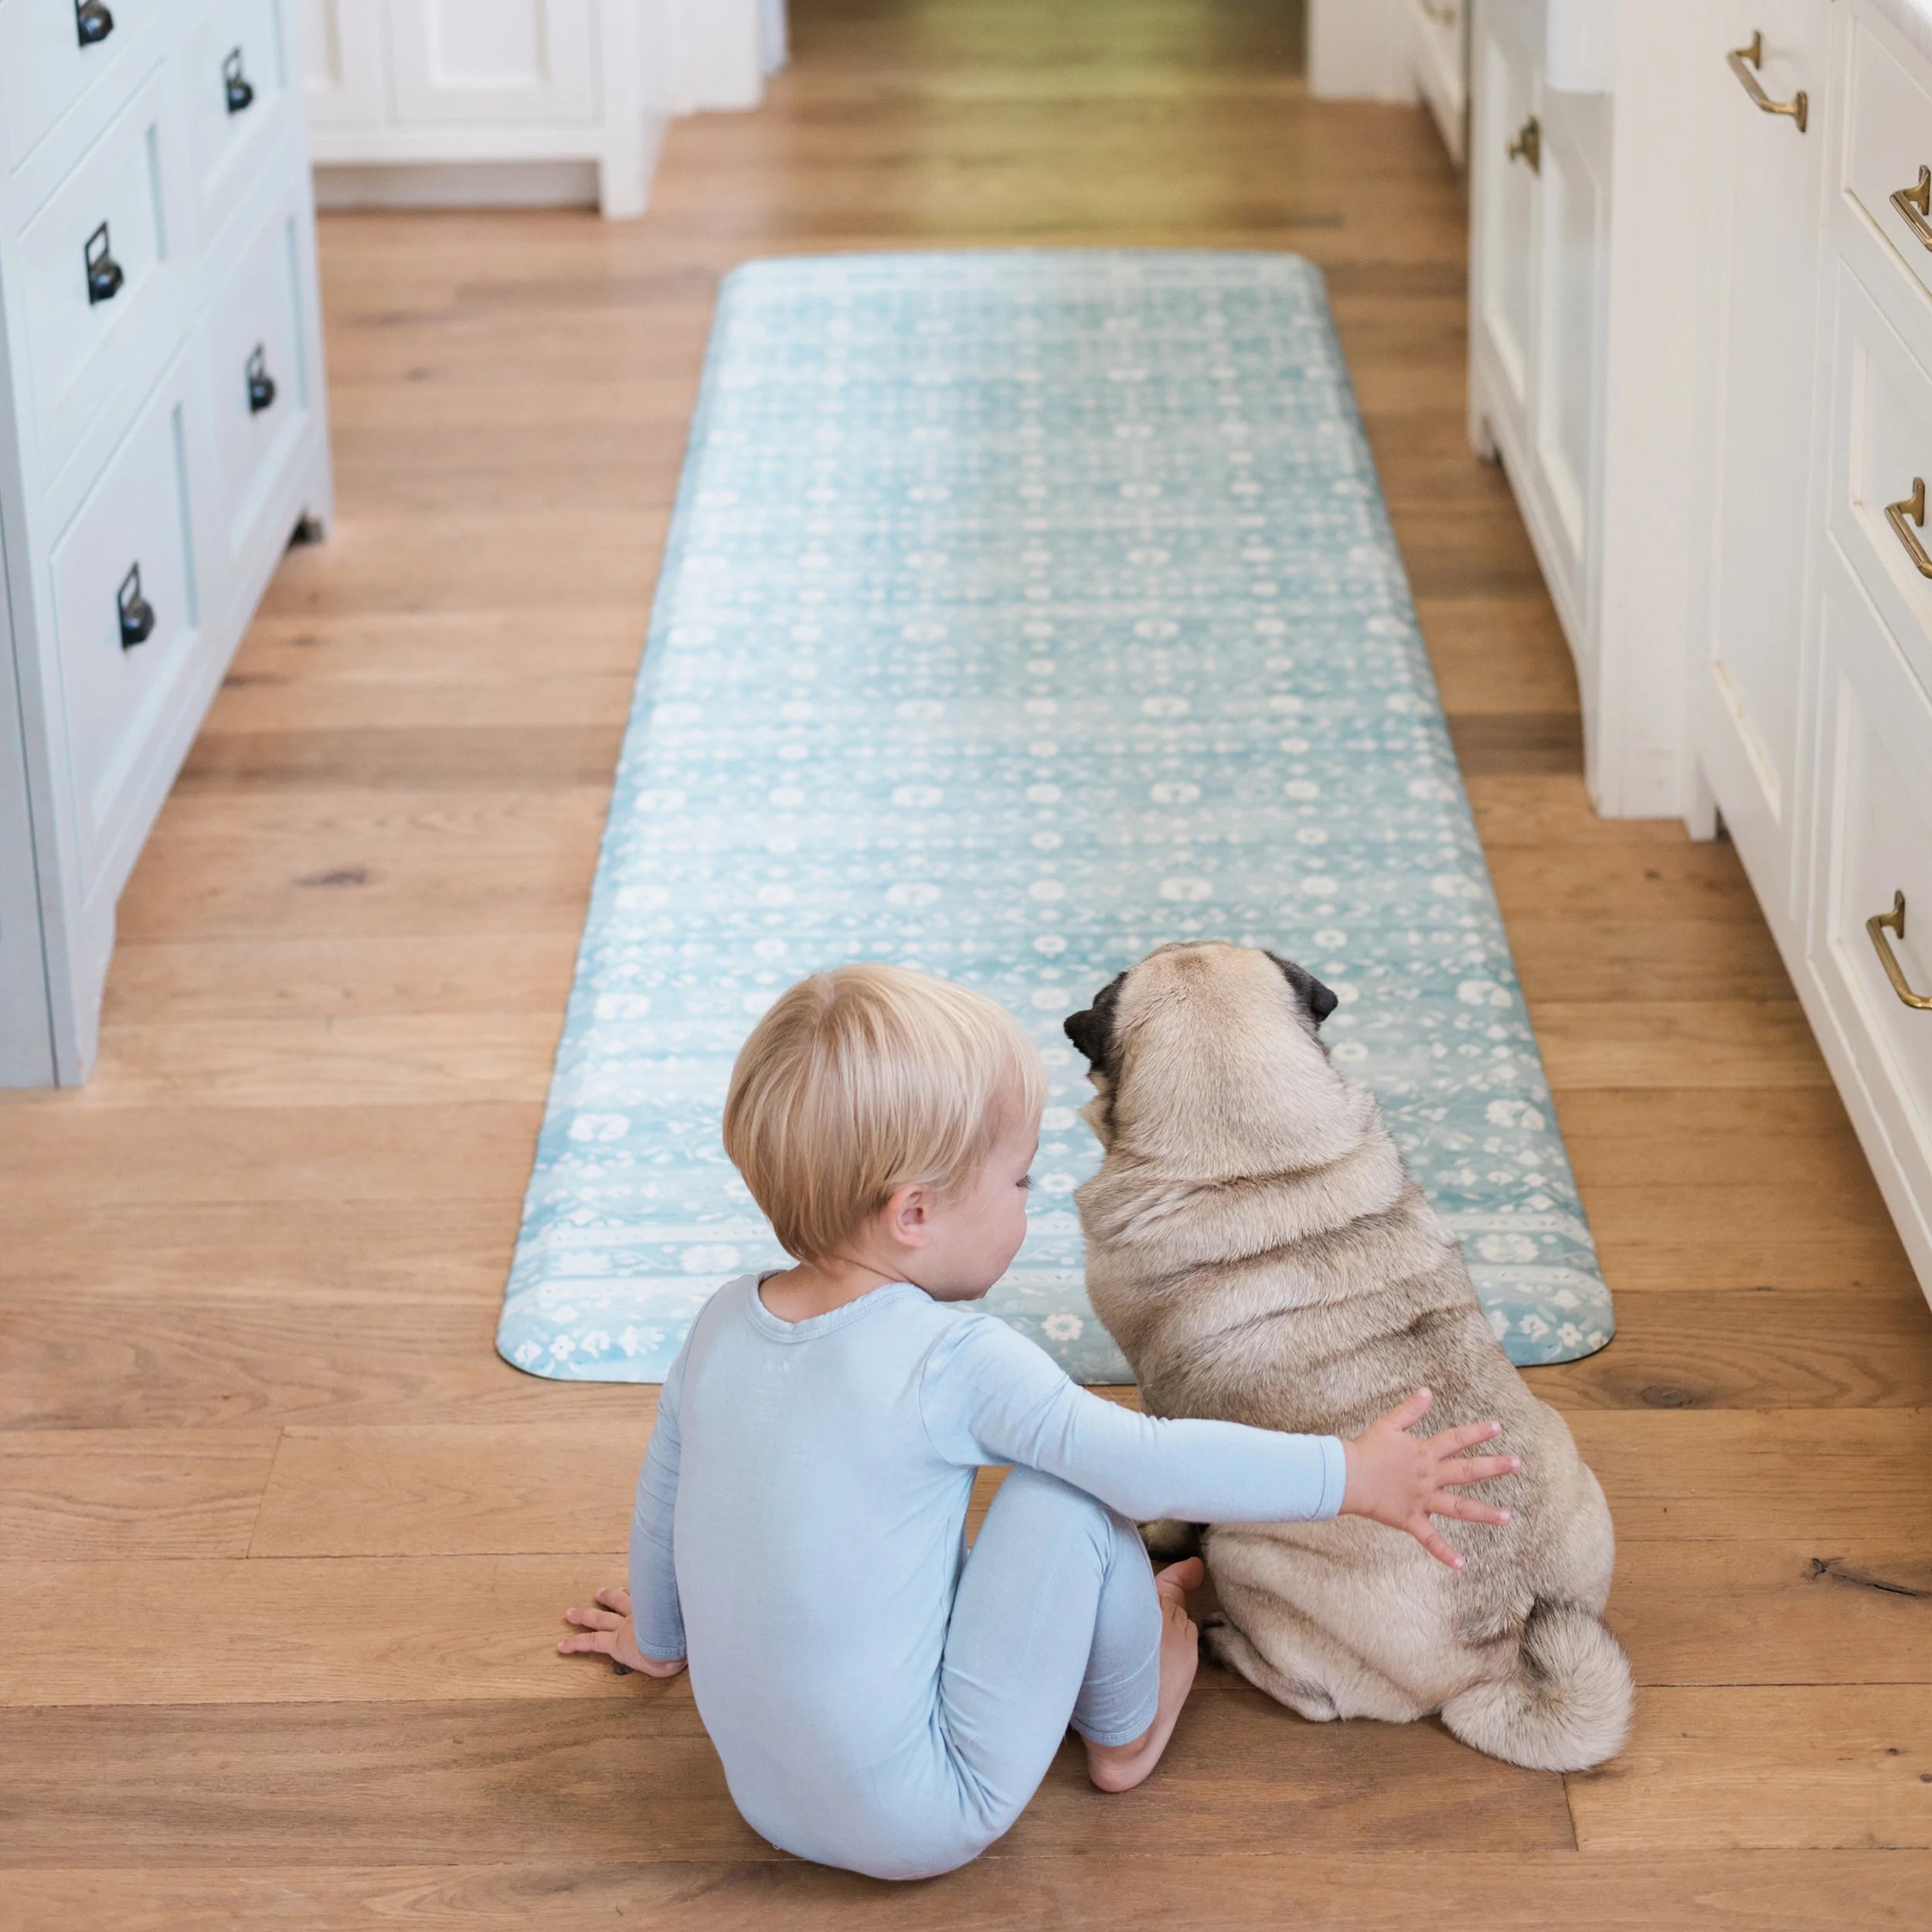 Nama standing mat Gemma White Sage green in kitchen with baby and dog shown in size 30x108